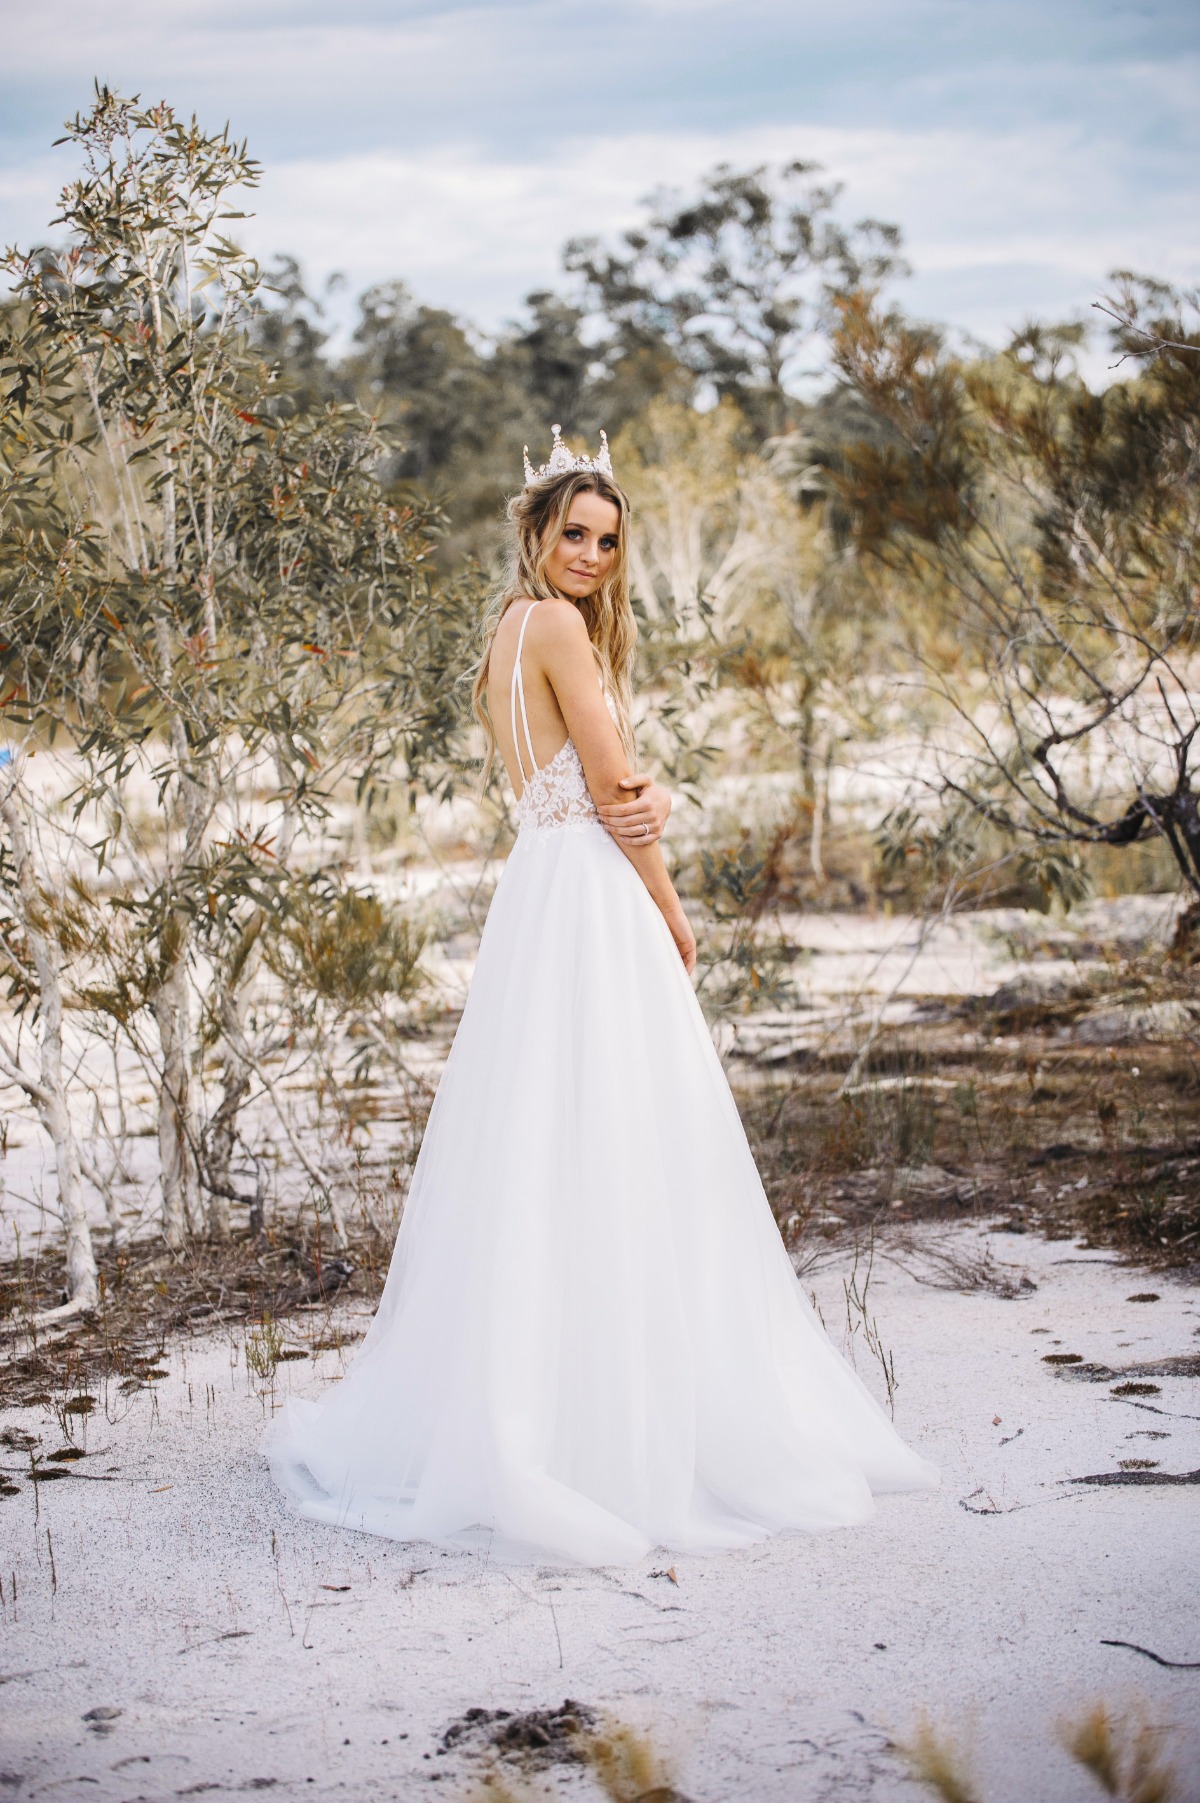 Elizabeth gown from Goddess by Nature